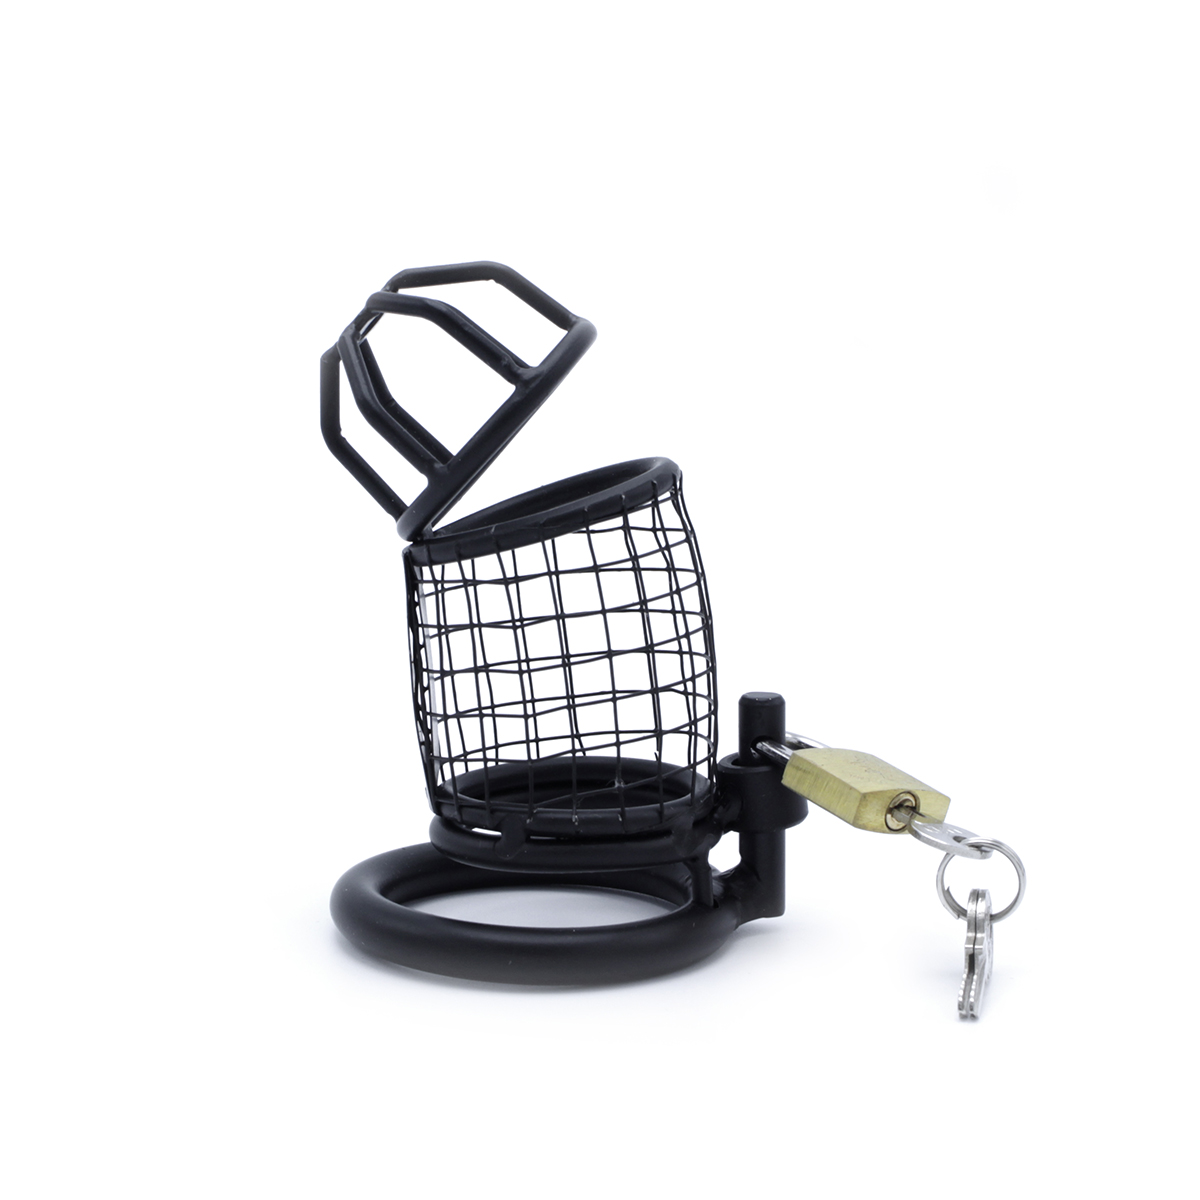 Chastity-Cage-Squares-Black-OPR-3010096-1